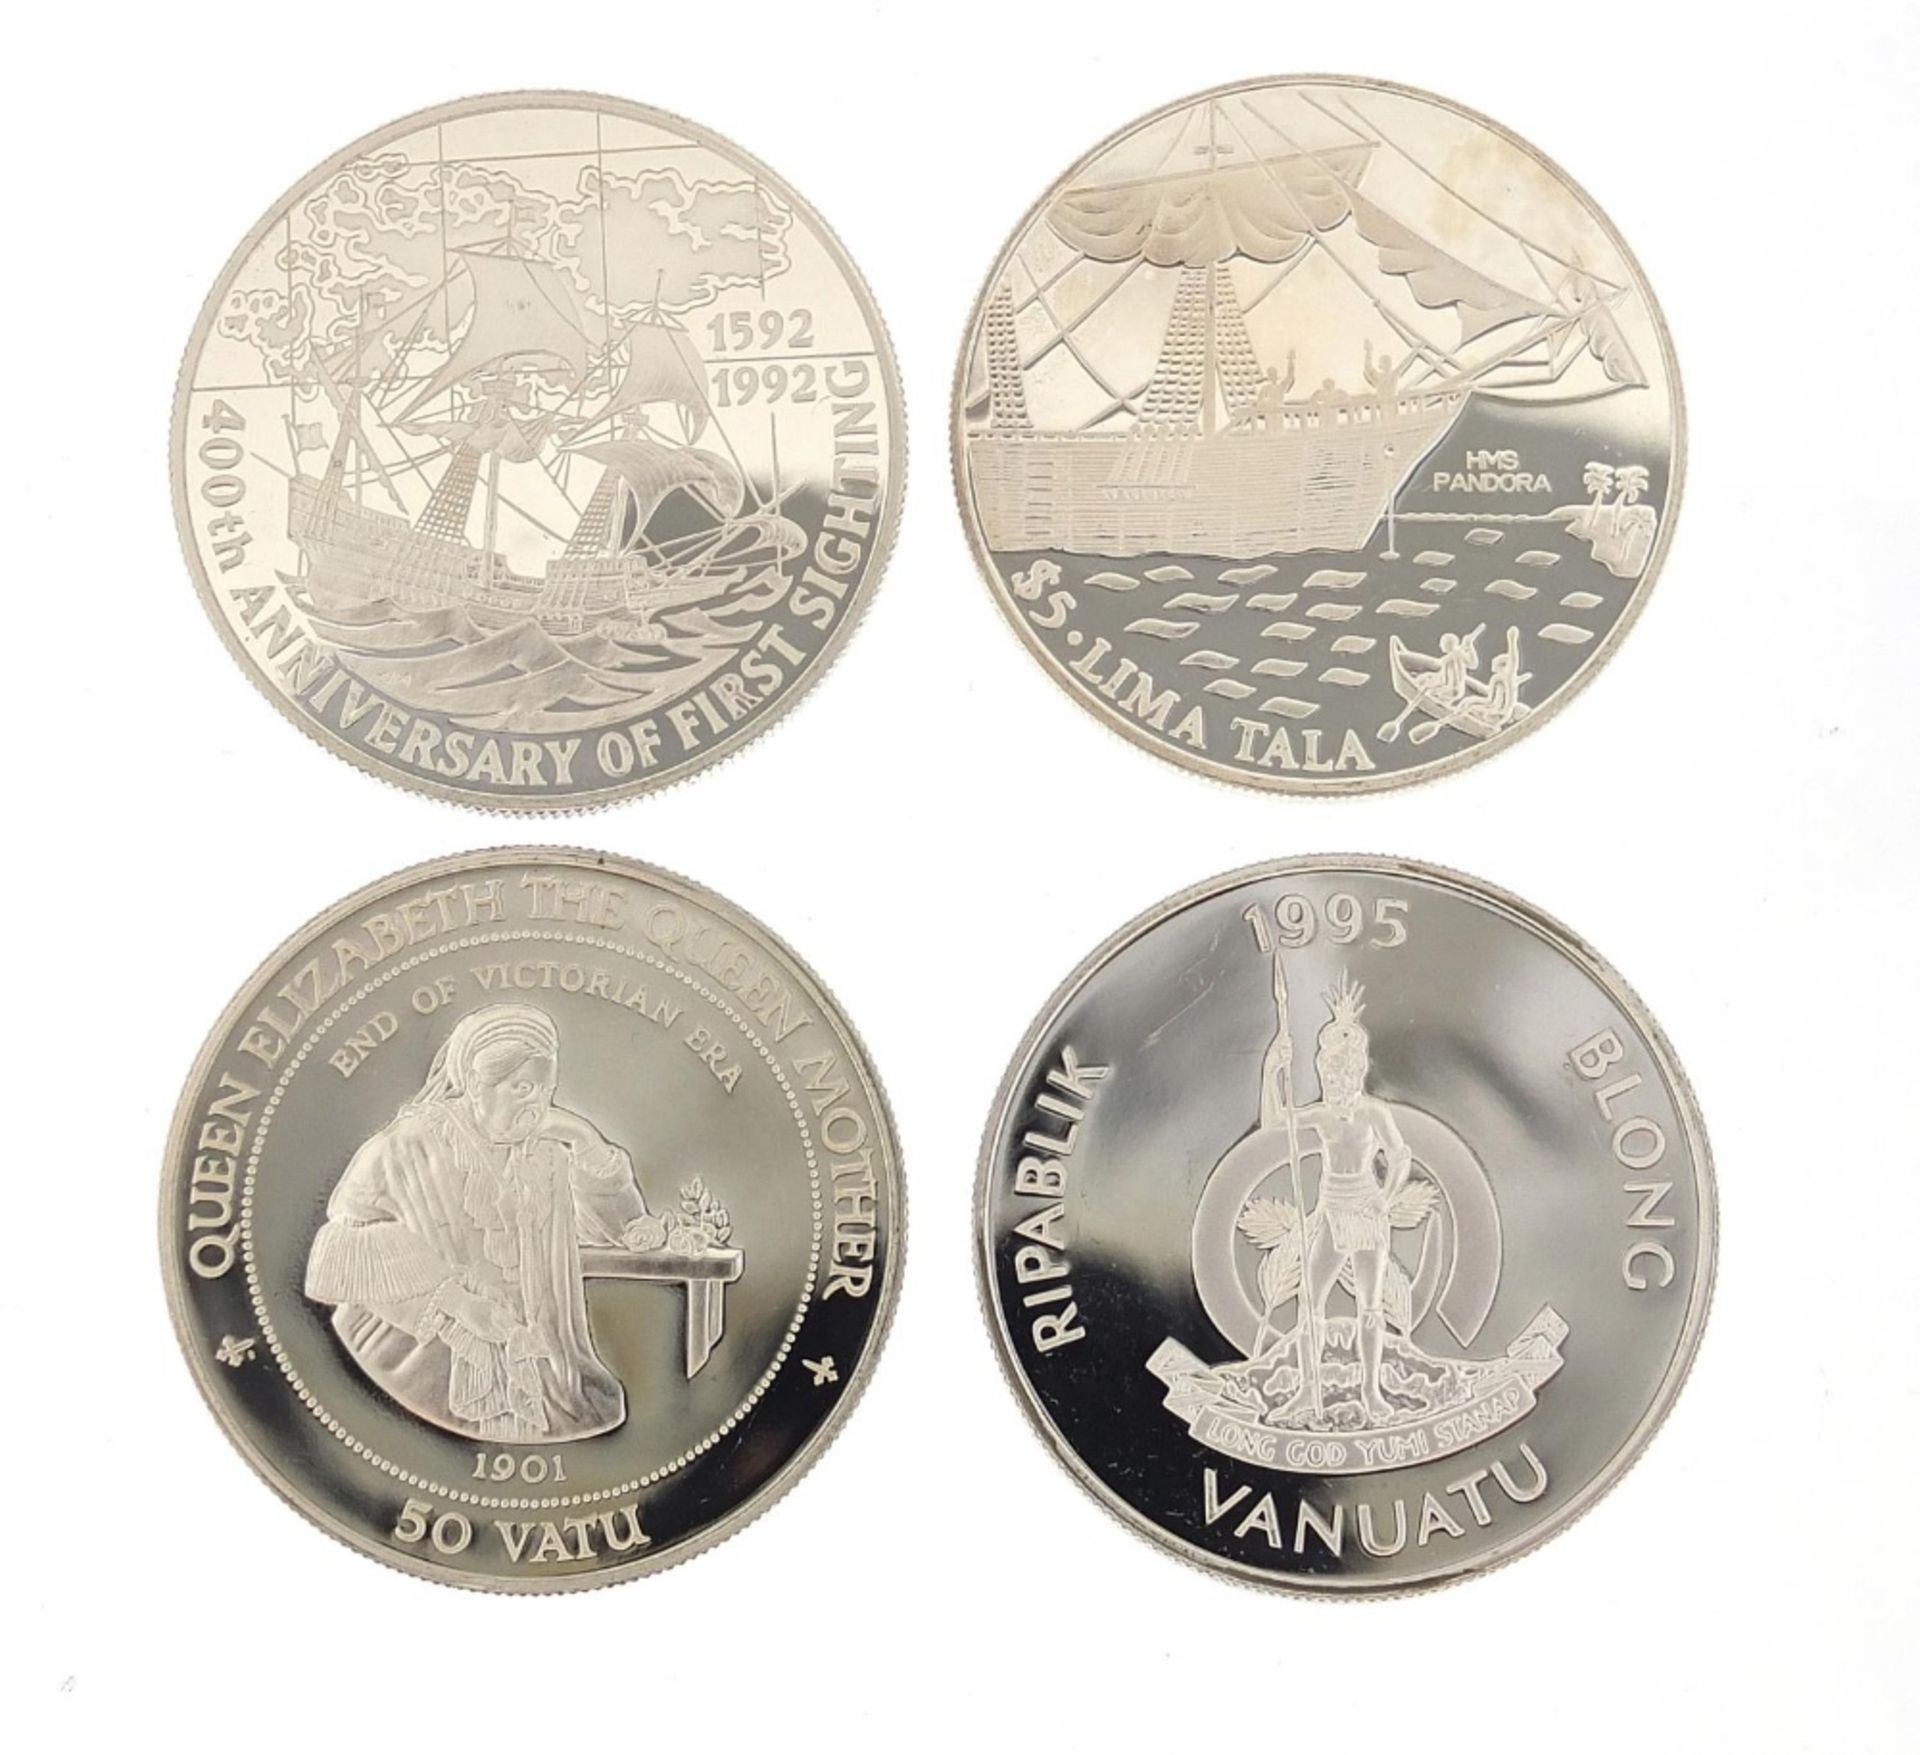 Four silver commemorative coins including Queen Elizabeth, The Queen Mother, 120g :For Further